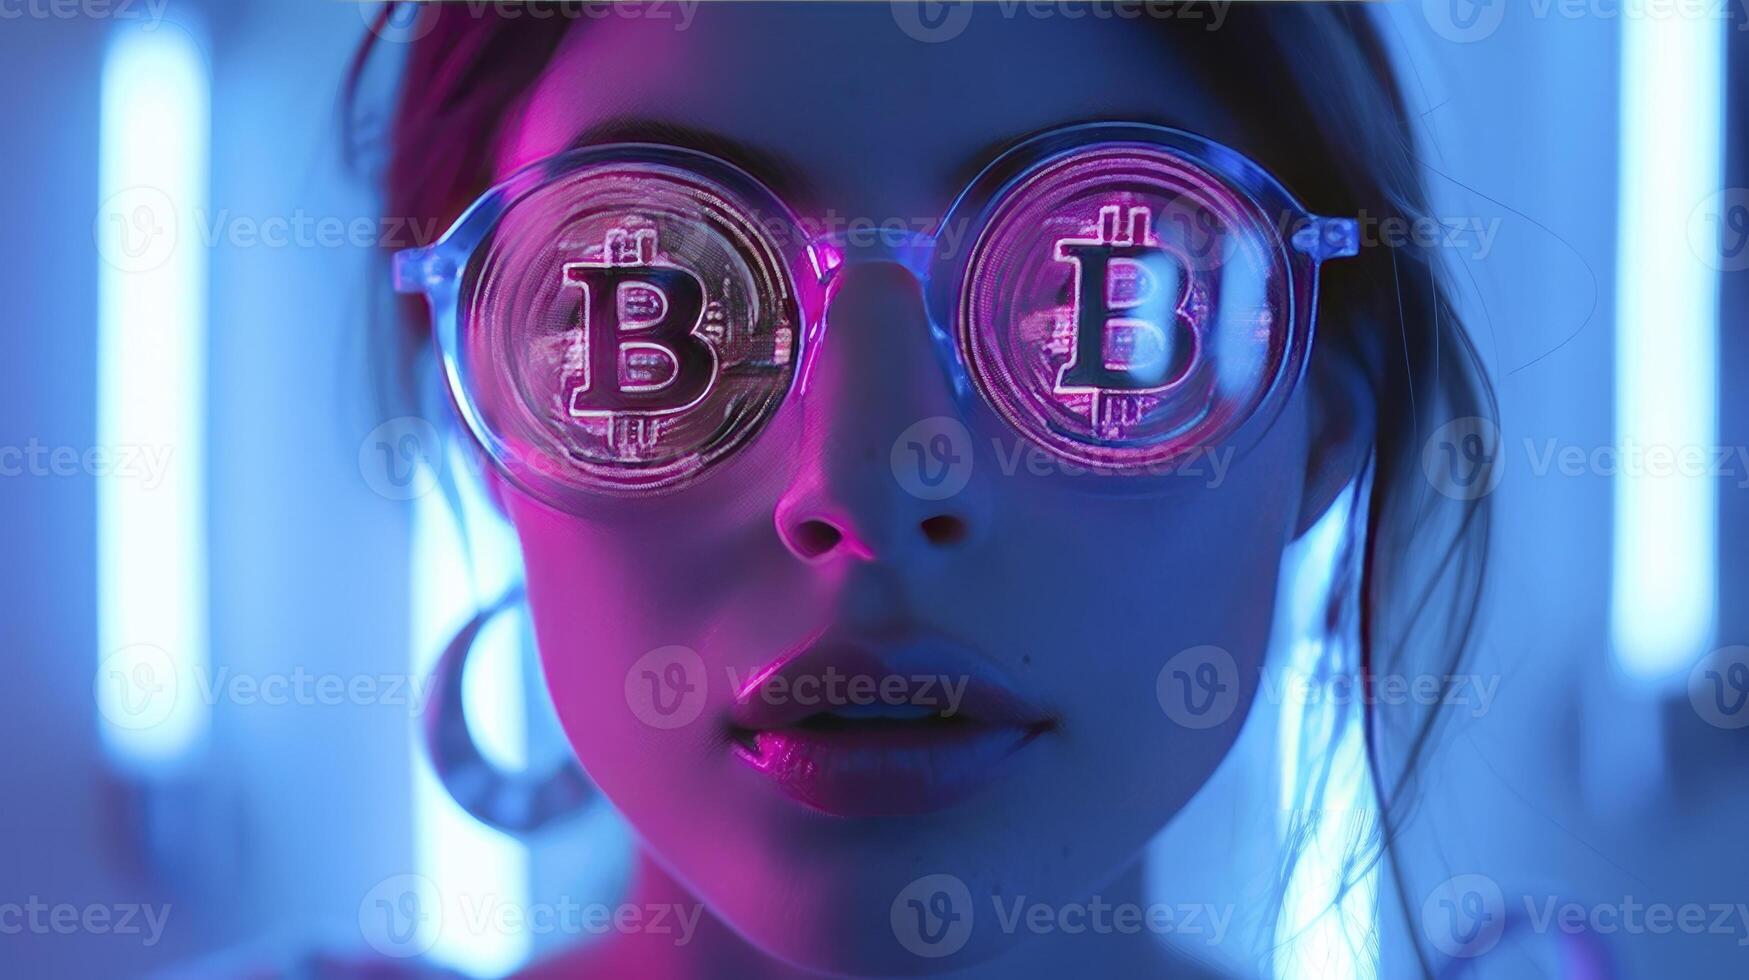 AI generated A Portrait of a Hipster Woman Wearing Bitcoin Glasses, Neon Lighting, with Bitcoins for Lenses. photo